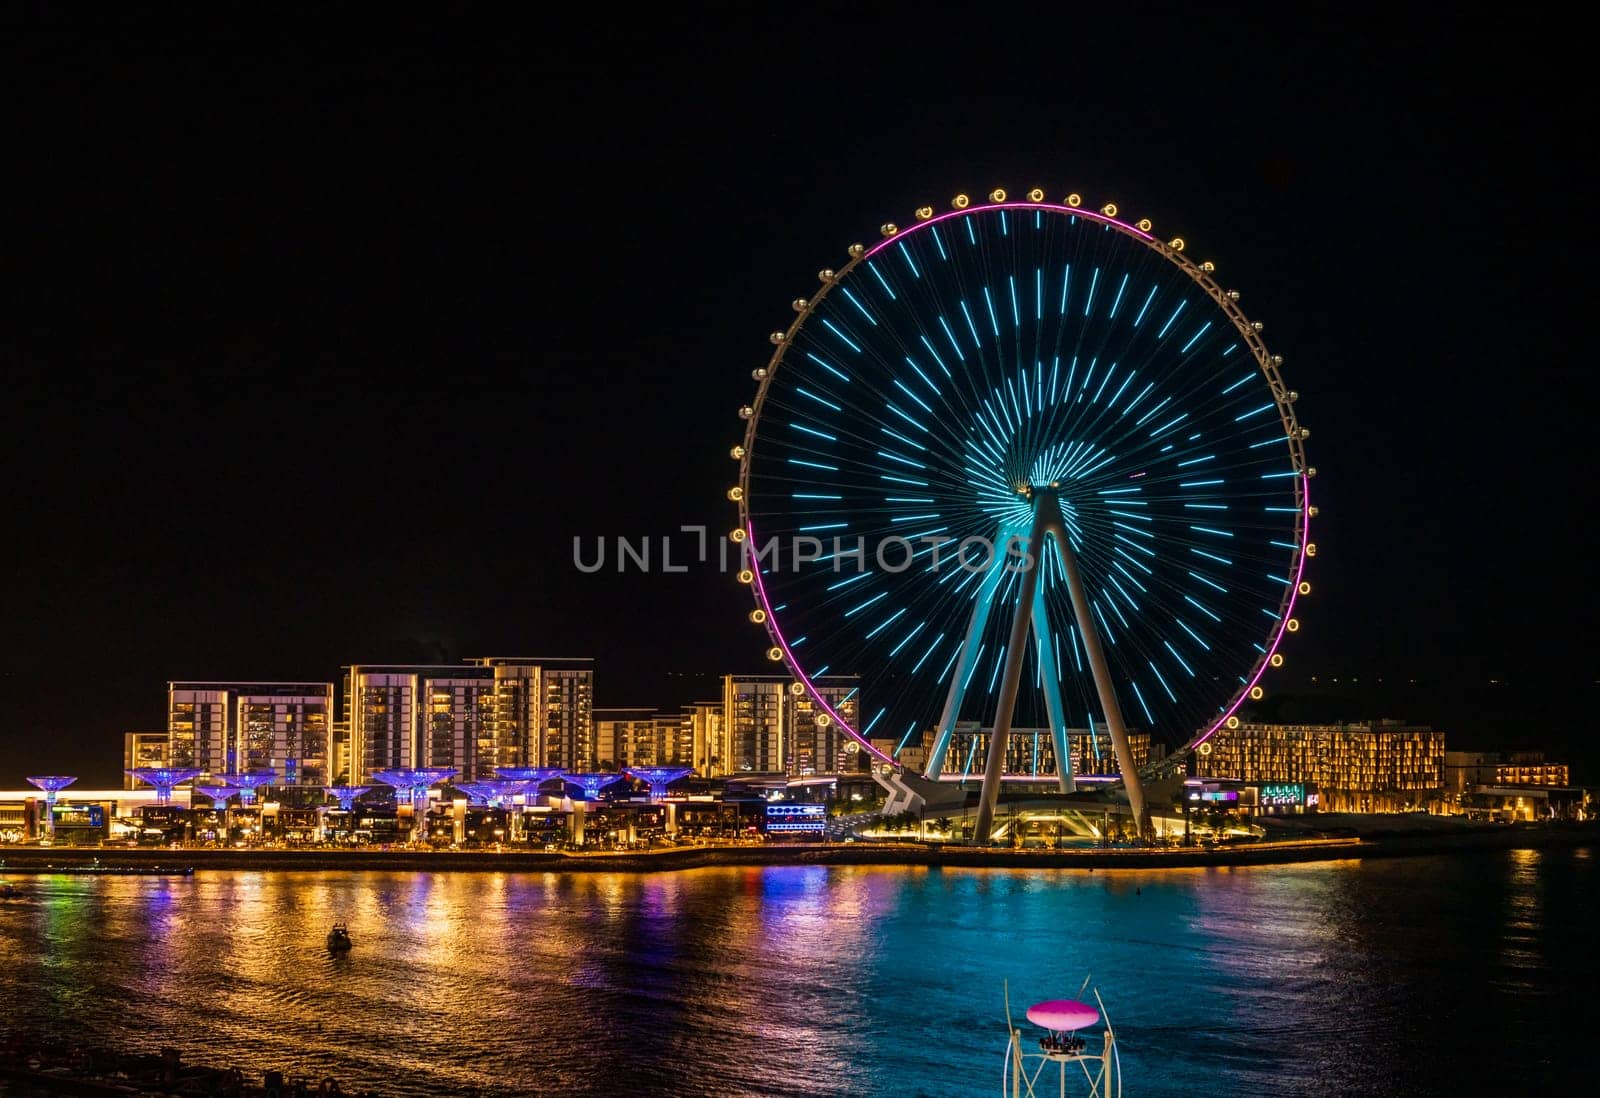 Light show on Ain Dubai observation wheel at sunset by steheap